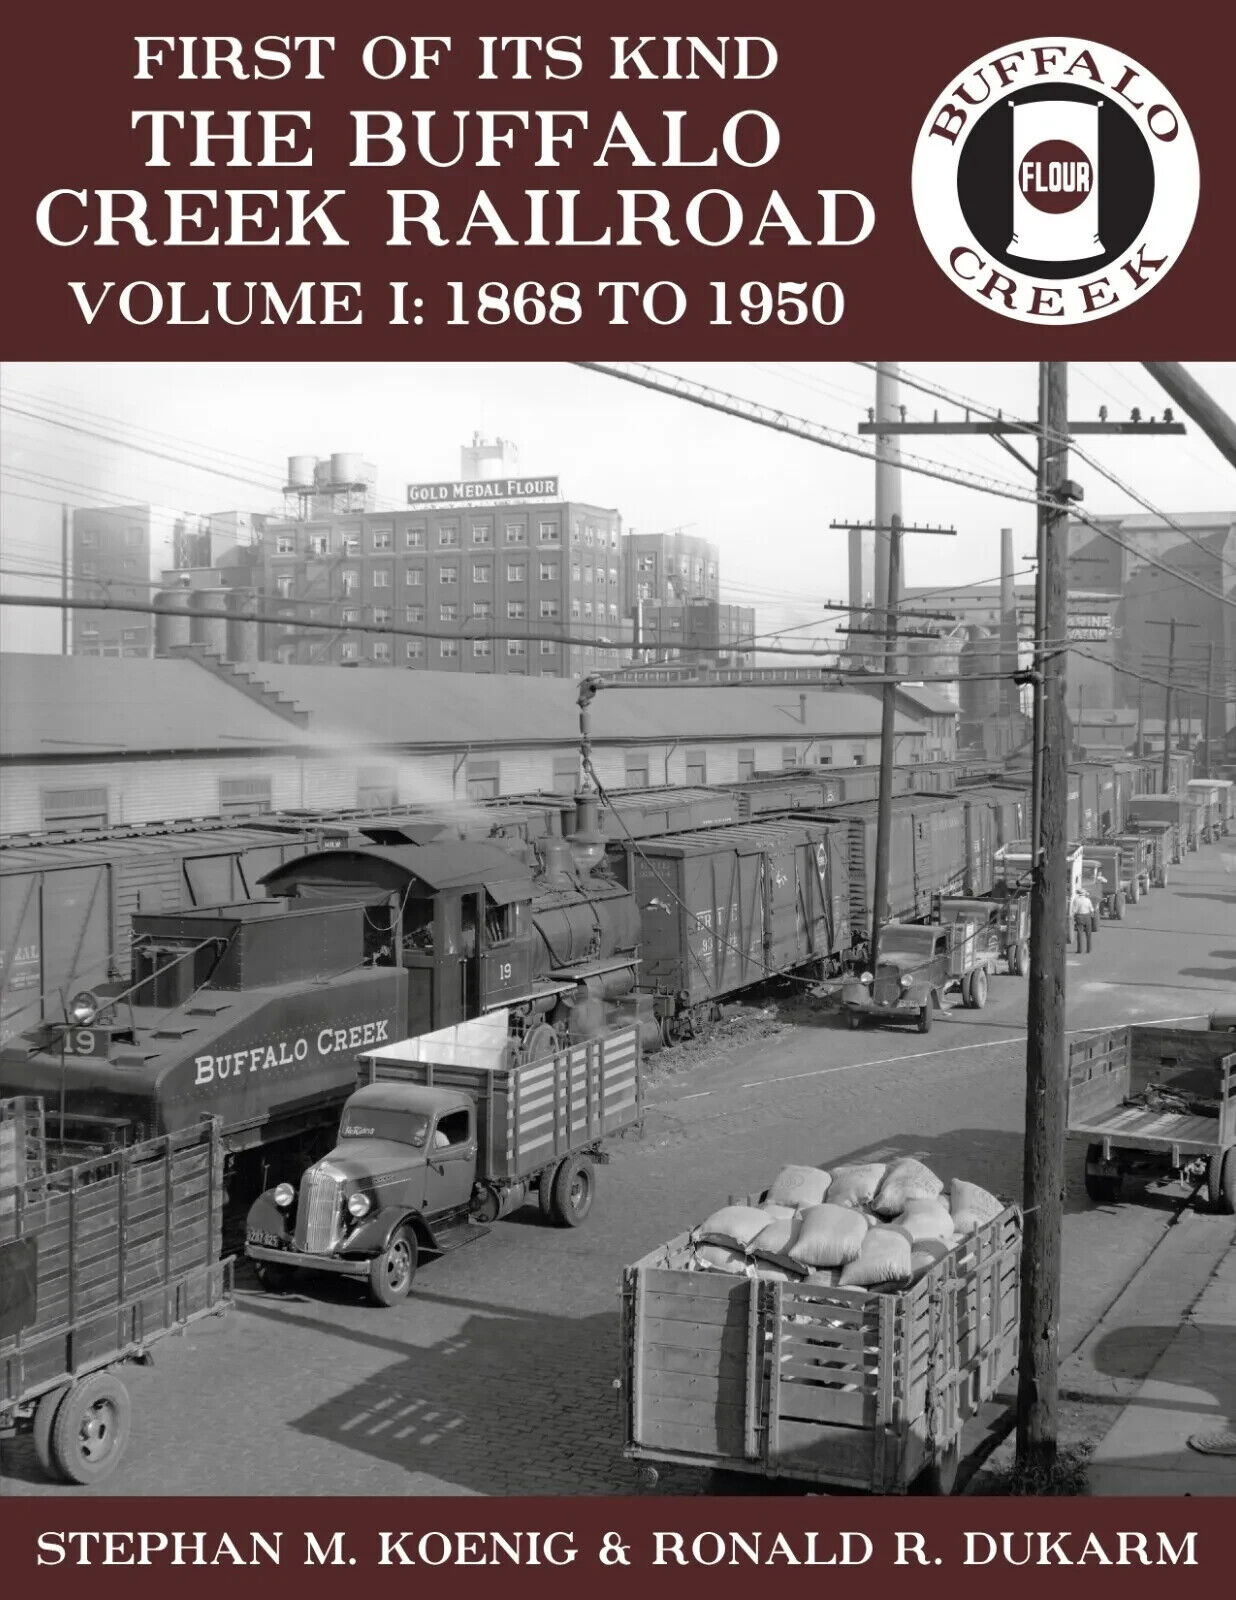 First of its Kind: The BUFFALO CREEK RAILROAD, Vol. 1 - 1868 to 1950 (BRAND NEW)